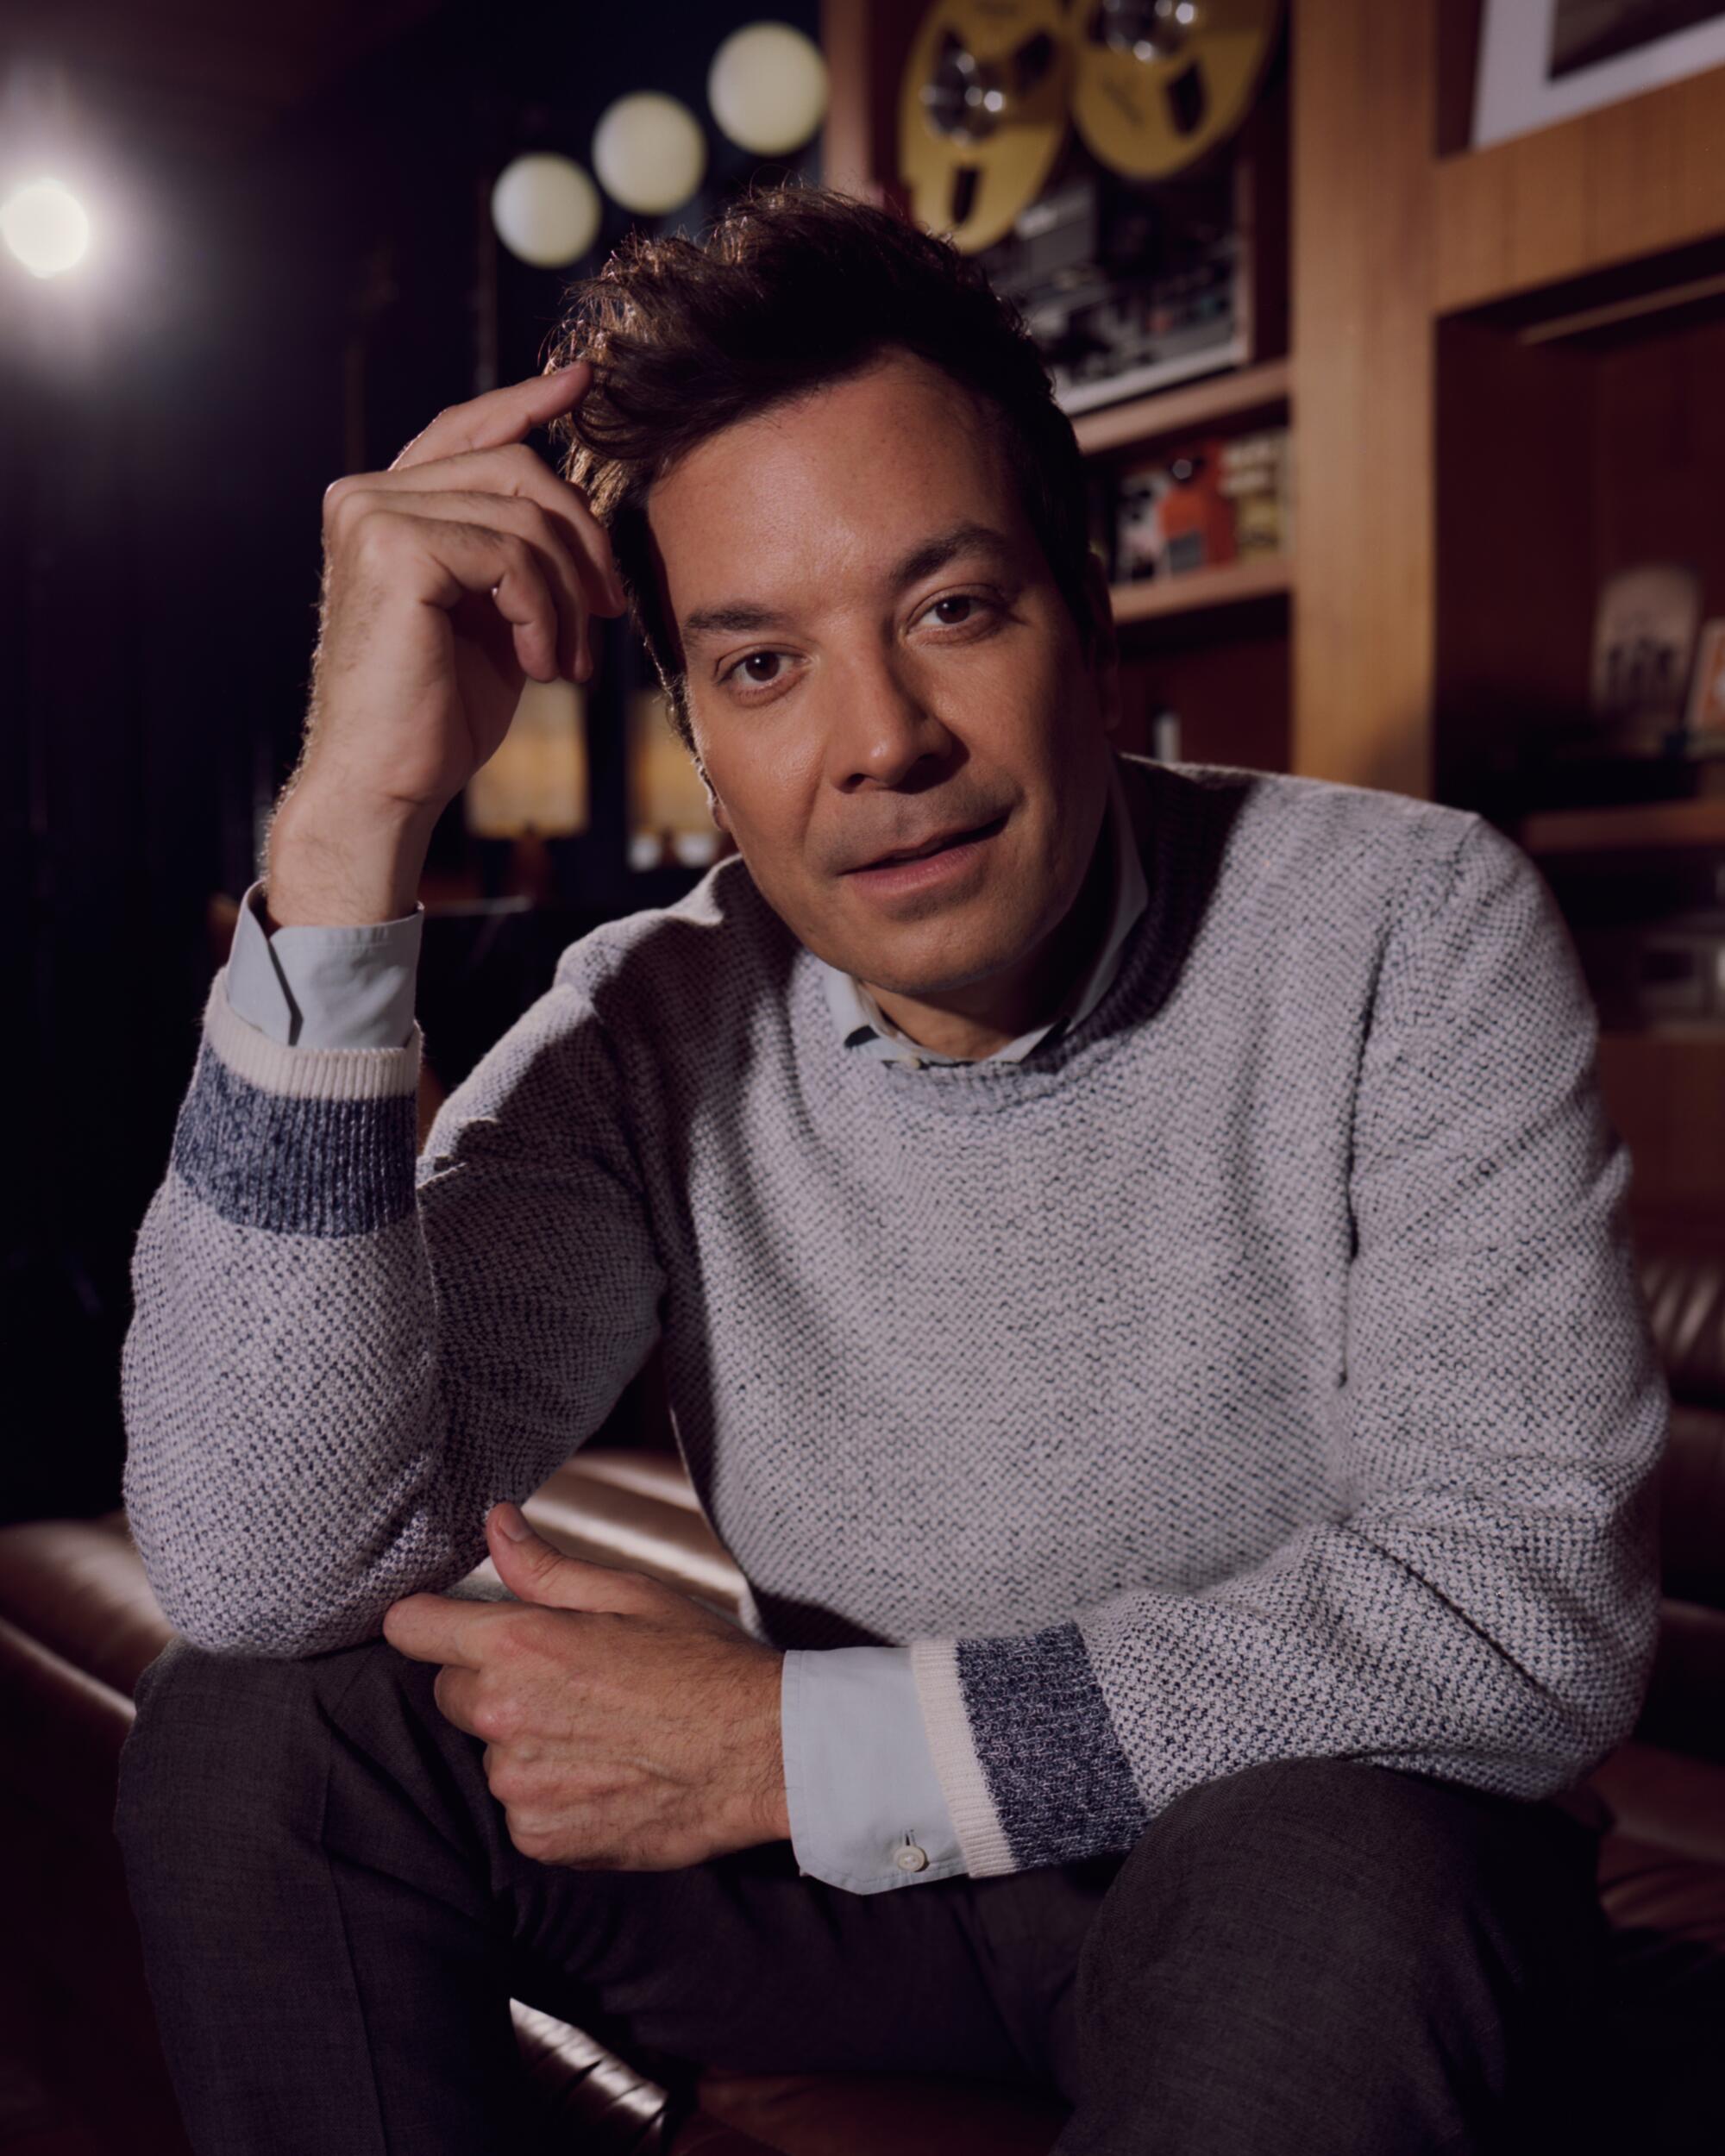 Jimmy Fallon rests his head on his hand for portrait.